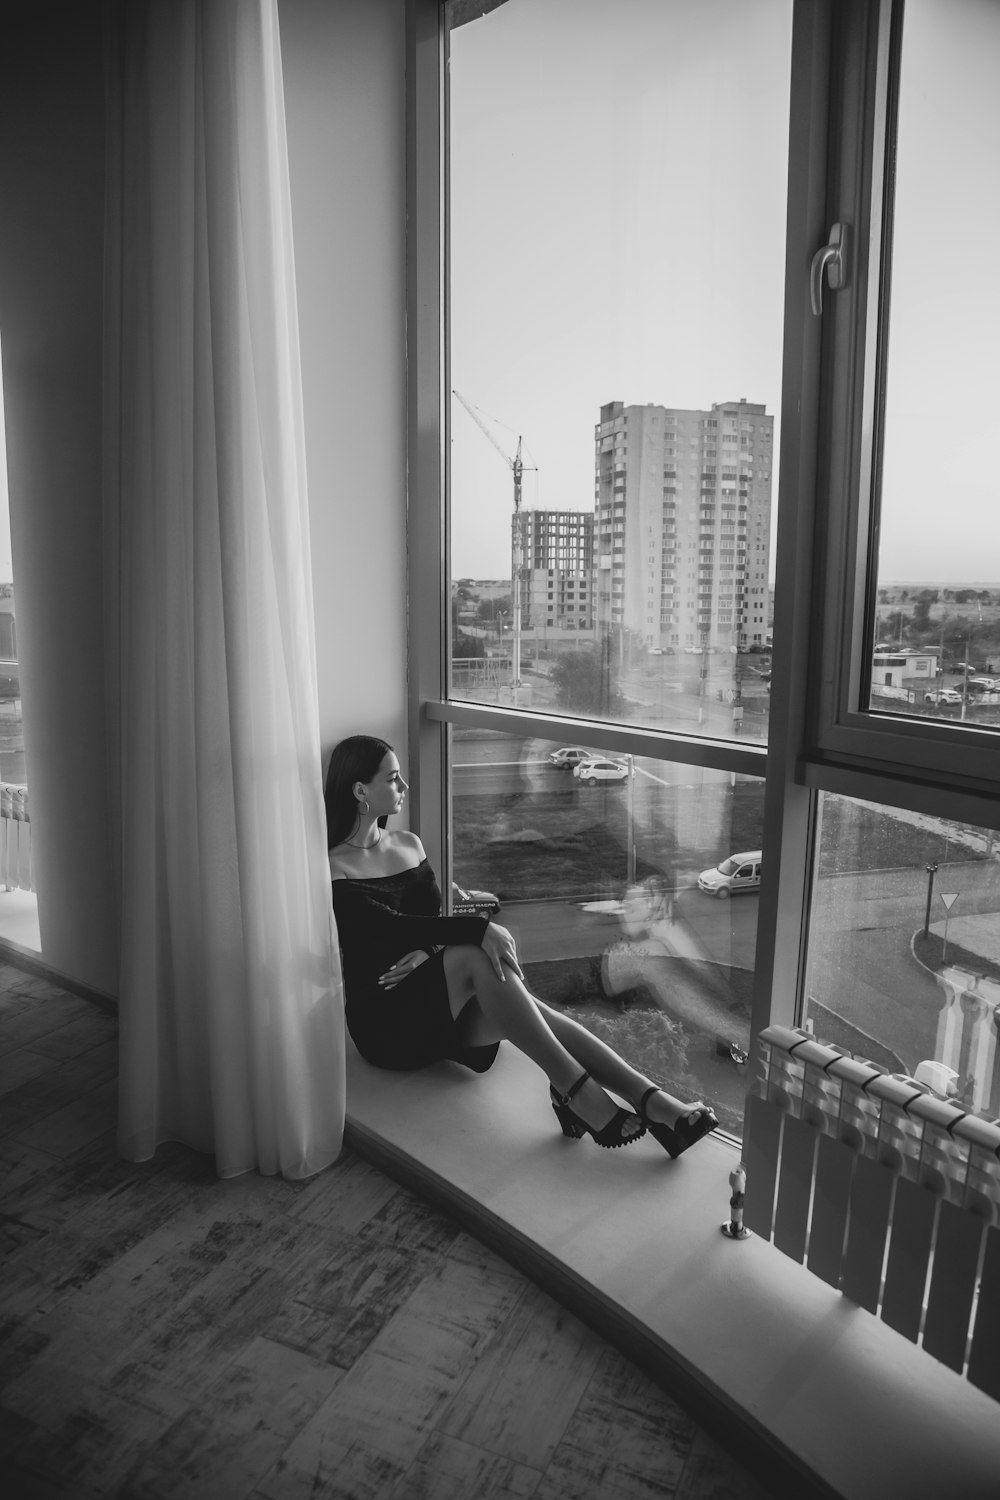 a woman sitting on a window sill looking out the window